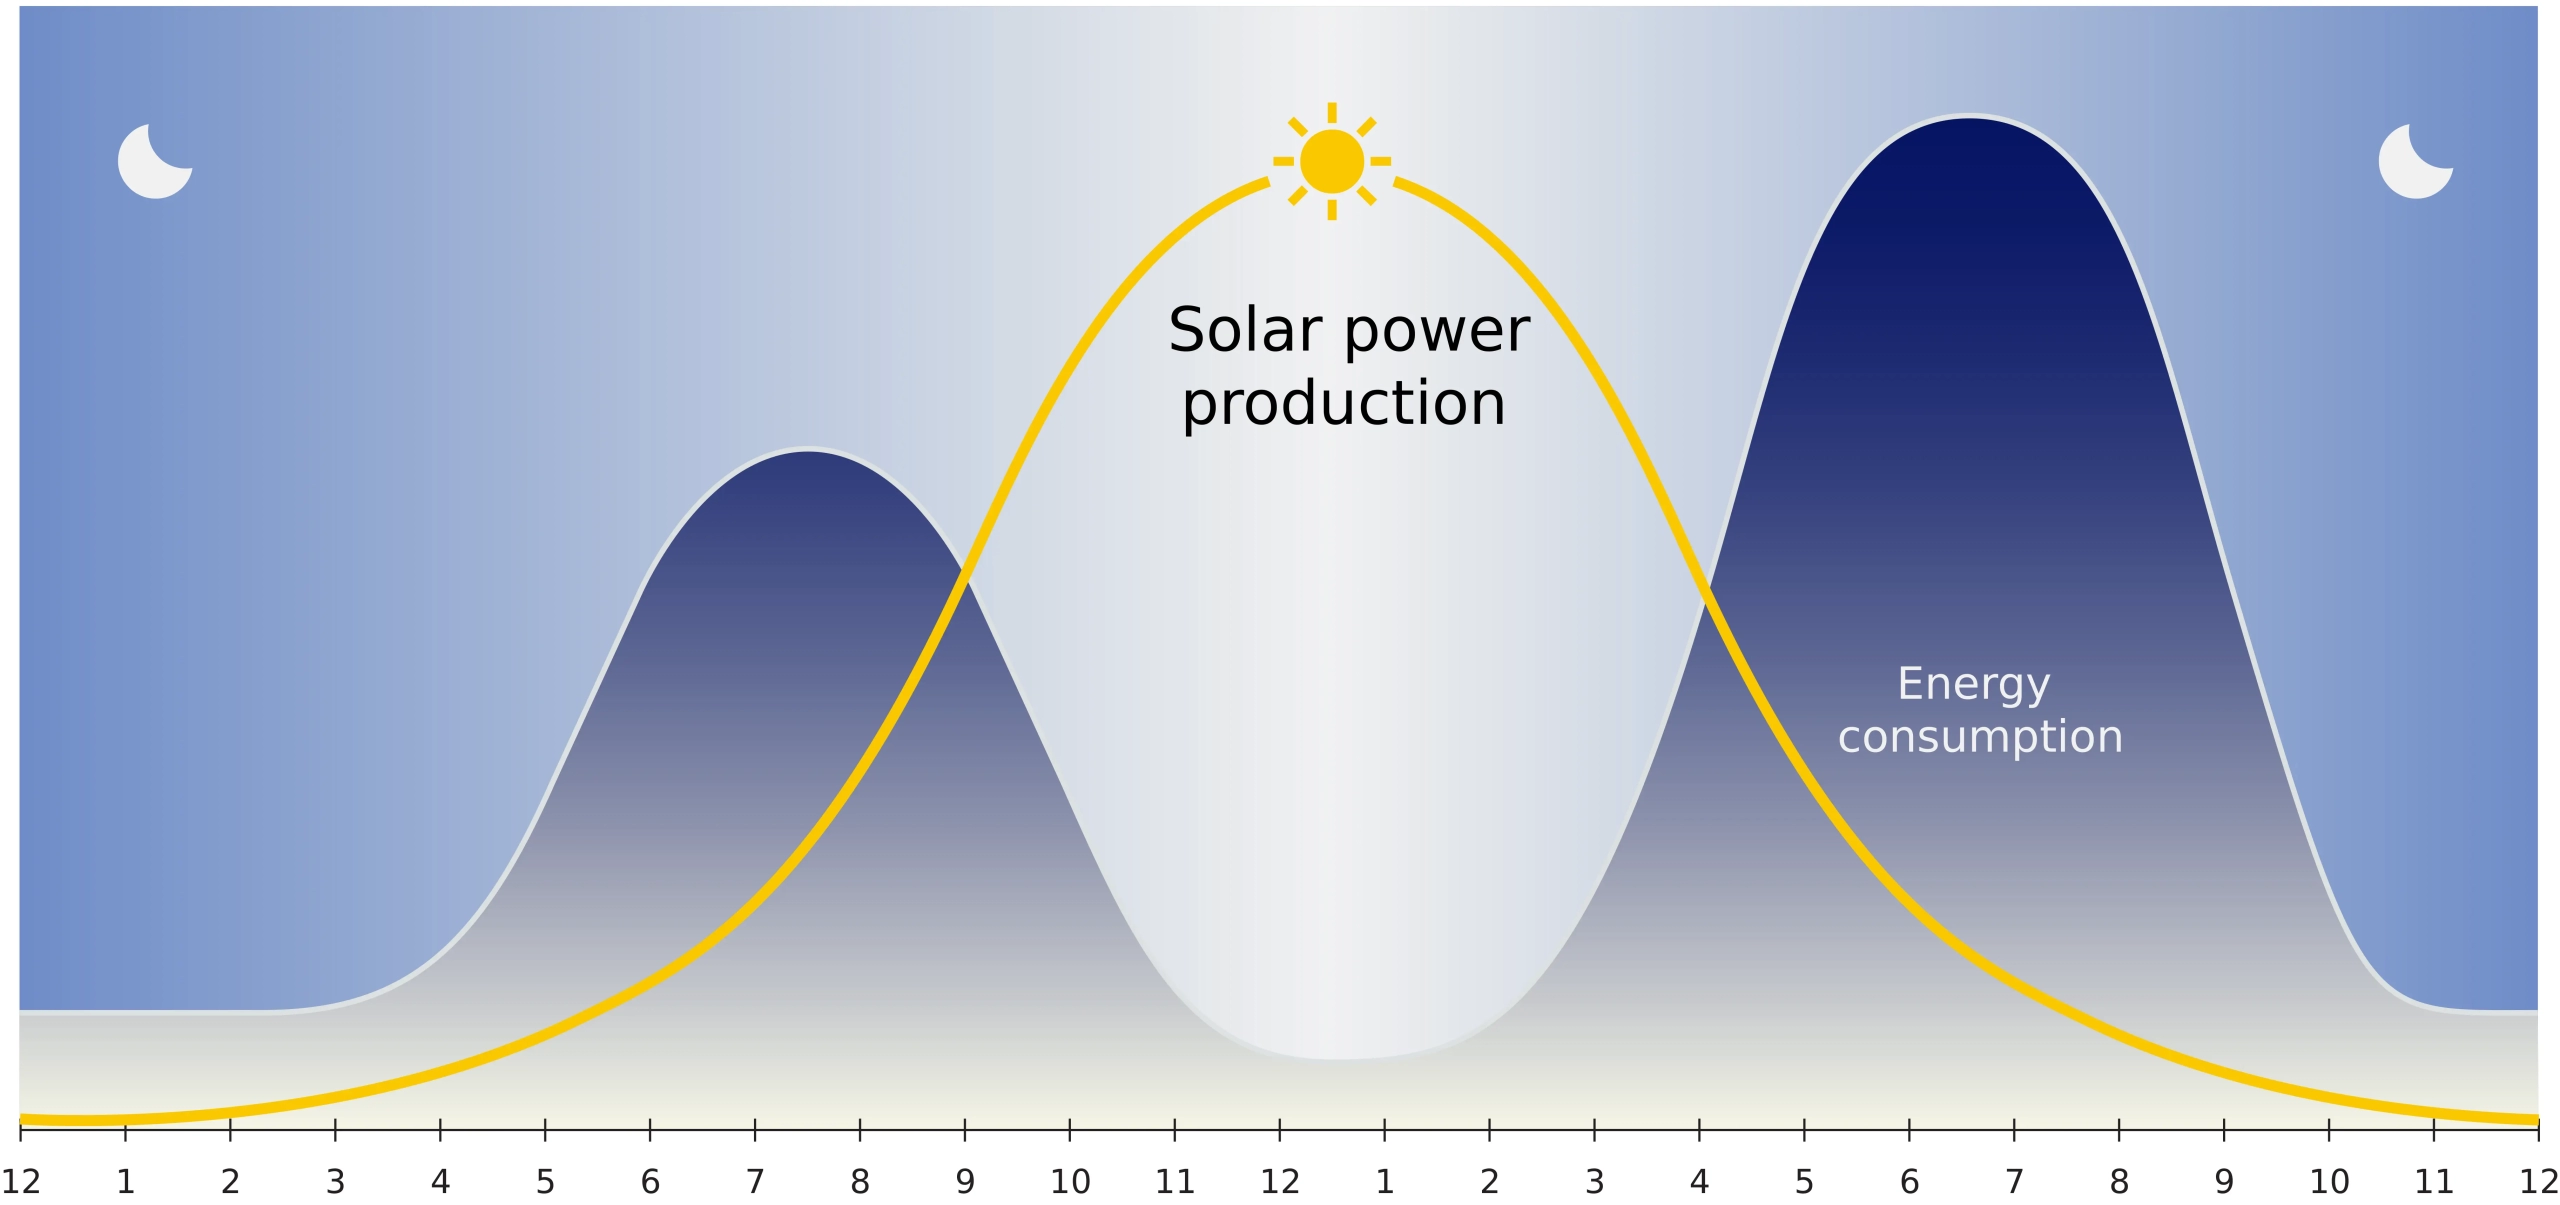 solar-power-pknergy-chart-after-scaled